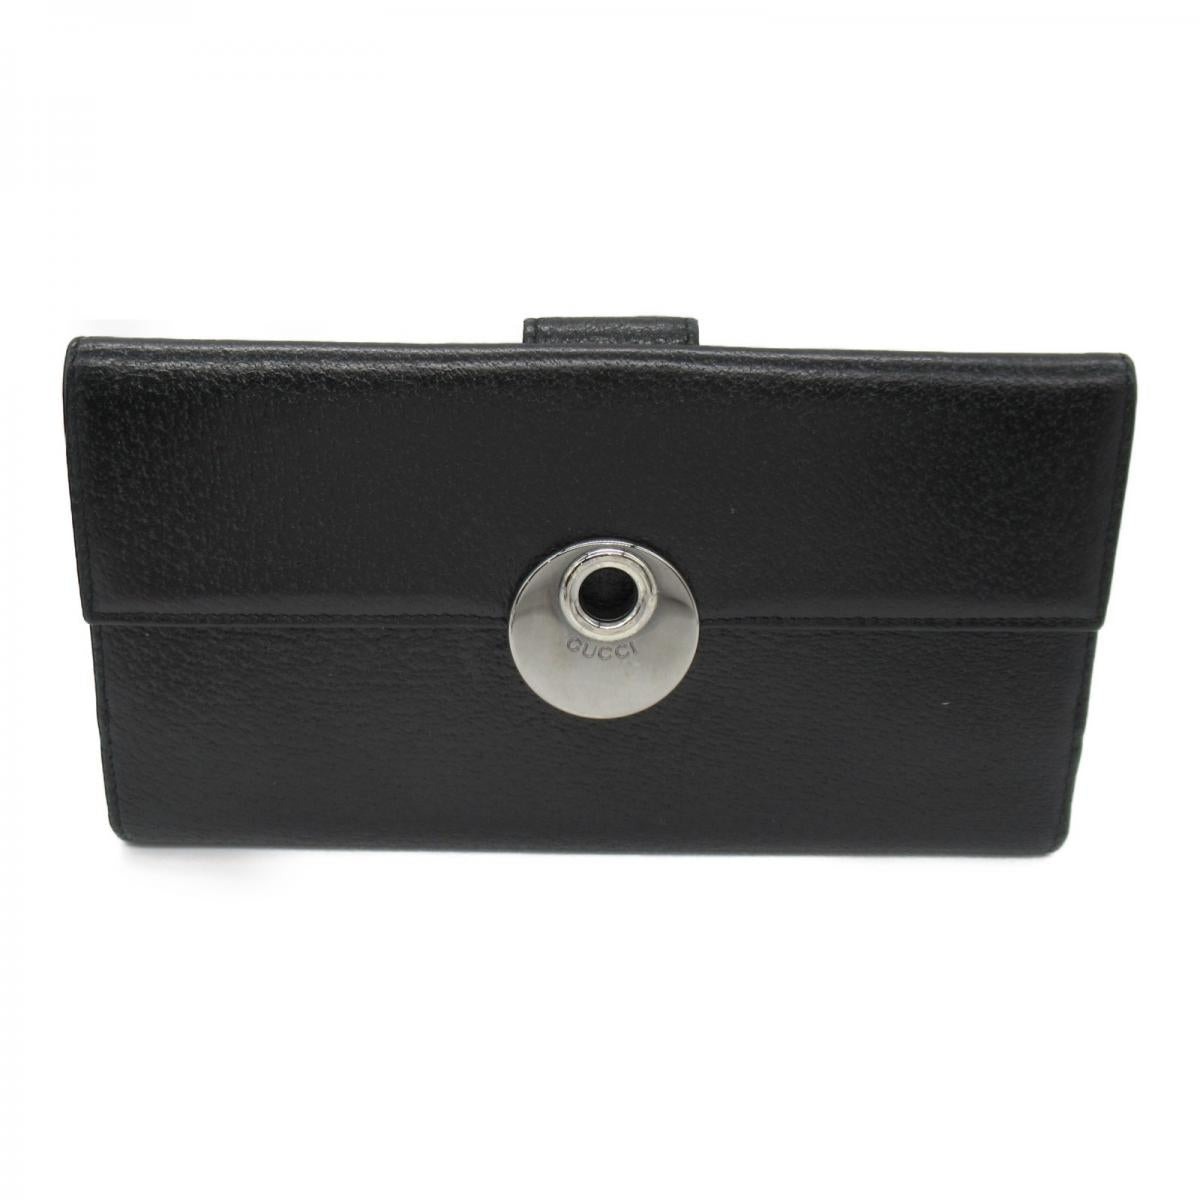 Leather Eclipse Wallet 120931